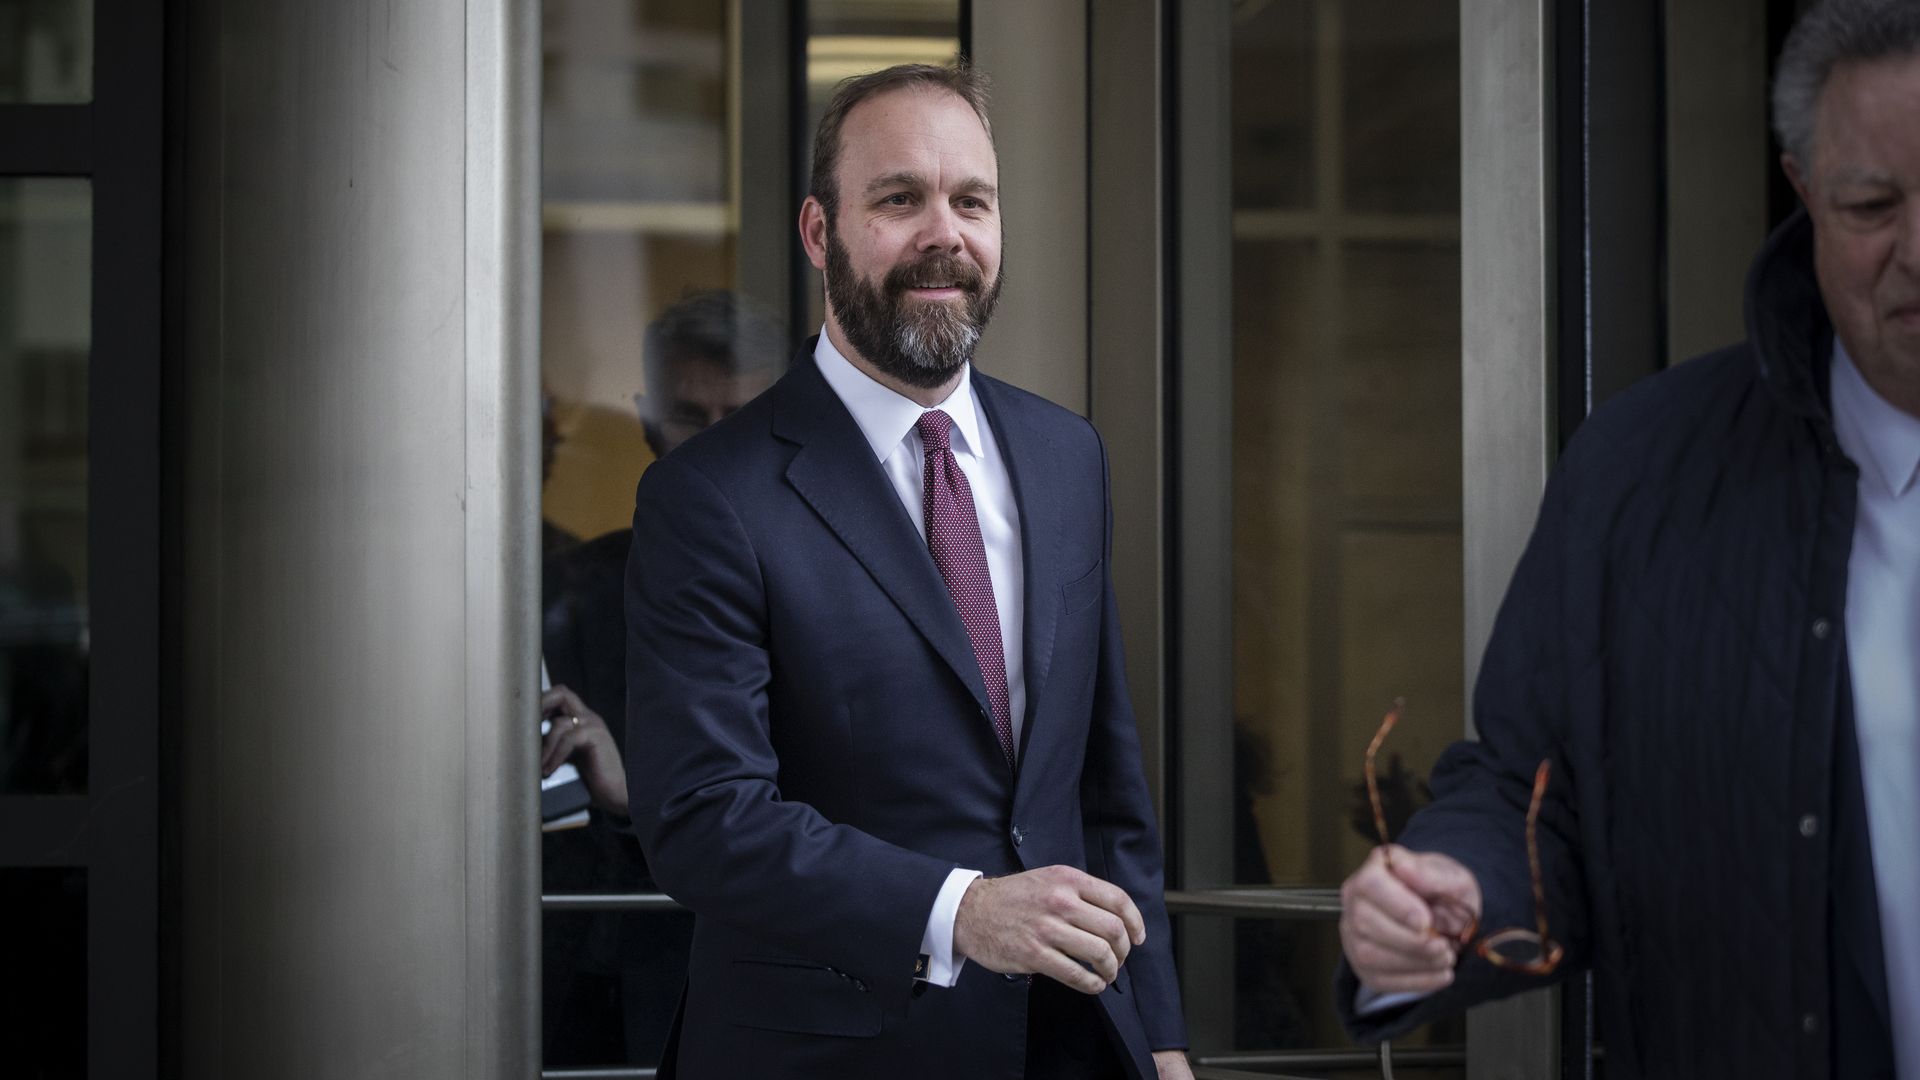 Rick Gates, a former top official in Trump's campaign, leaves the Federal courthouse on Tuesday. Photo: Evelyn Hockstein/For The Washington Post via Getty Images